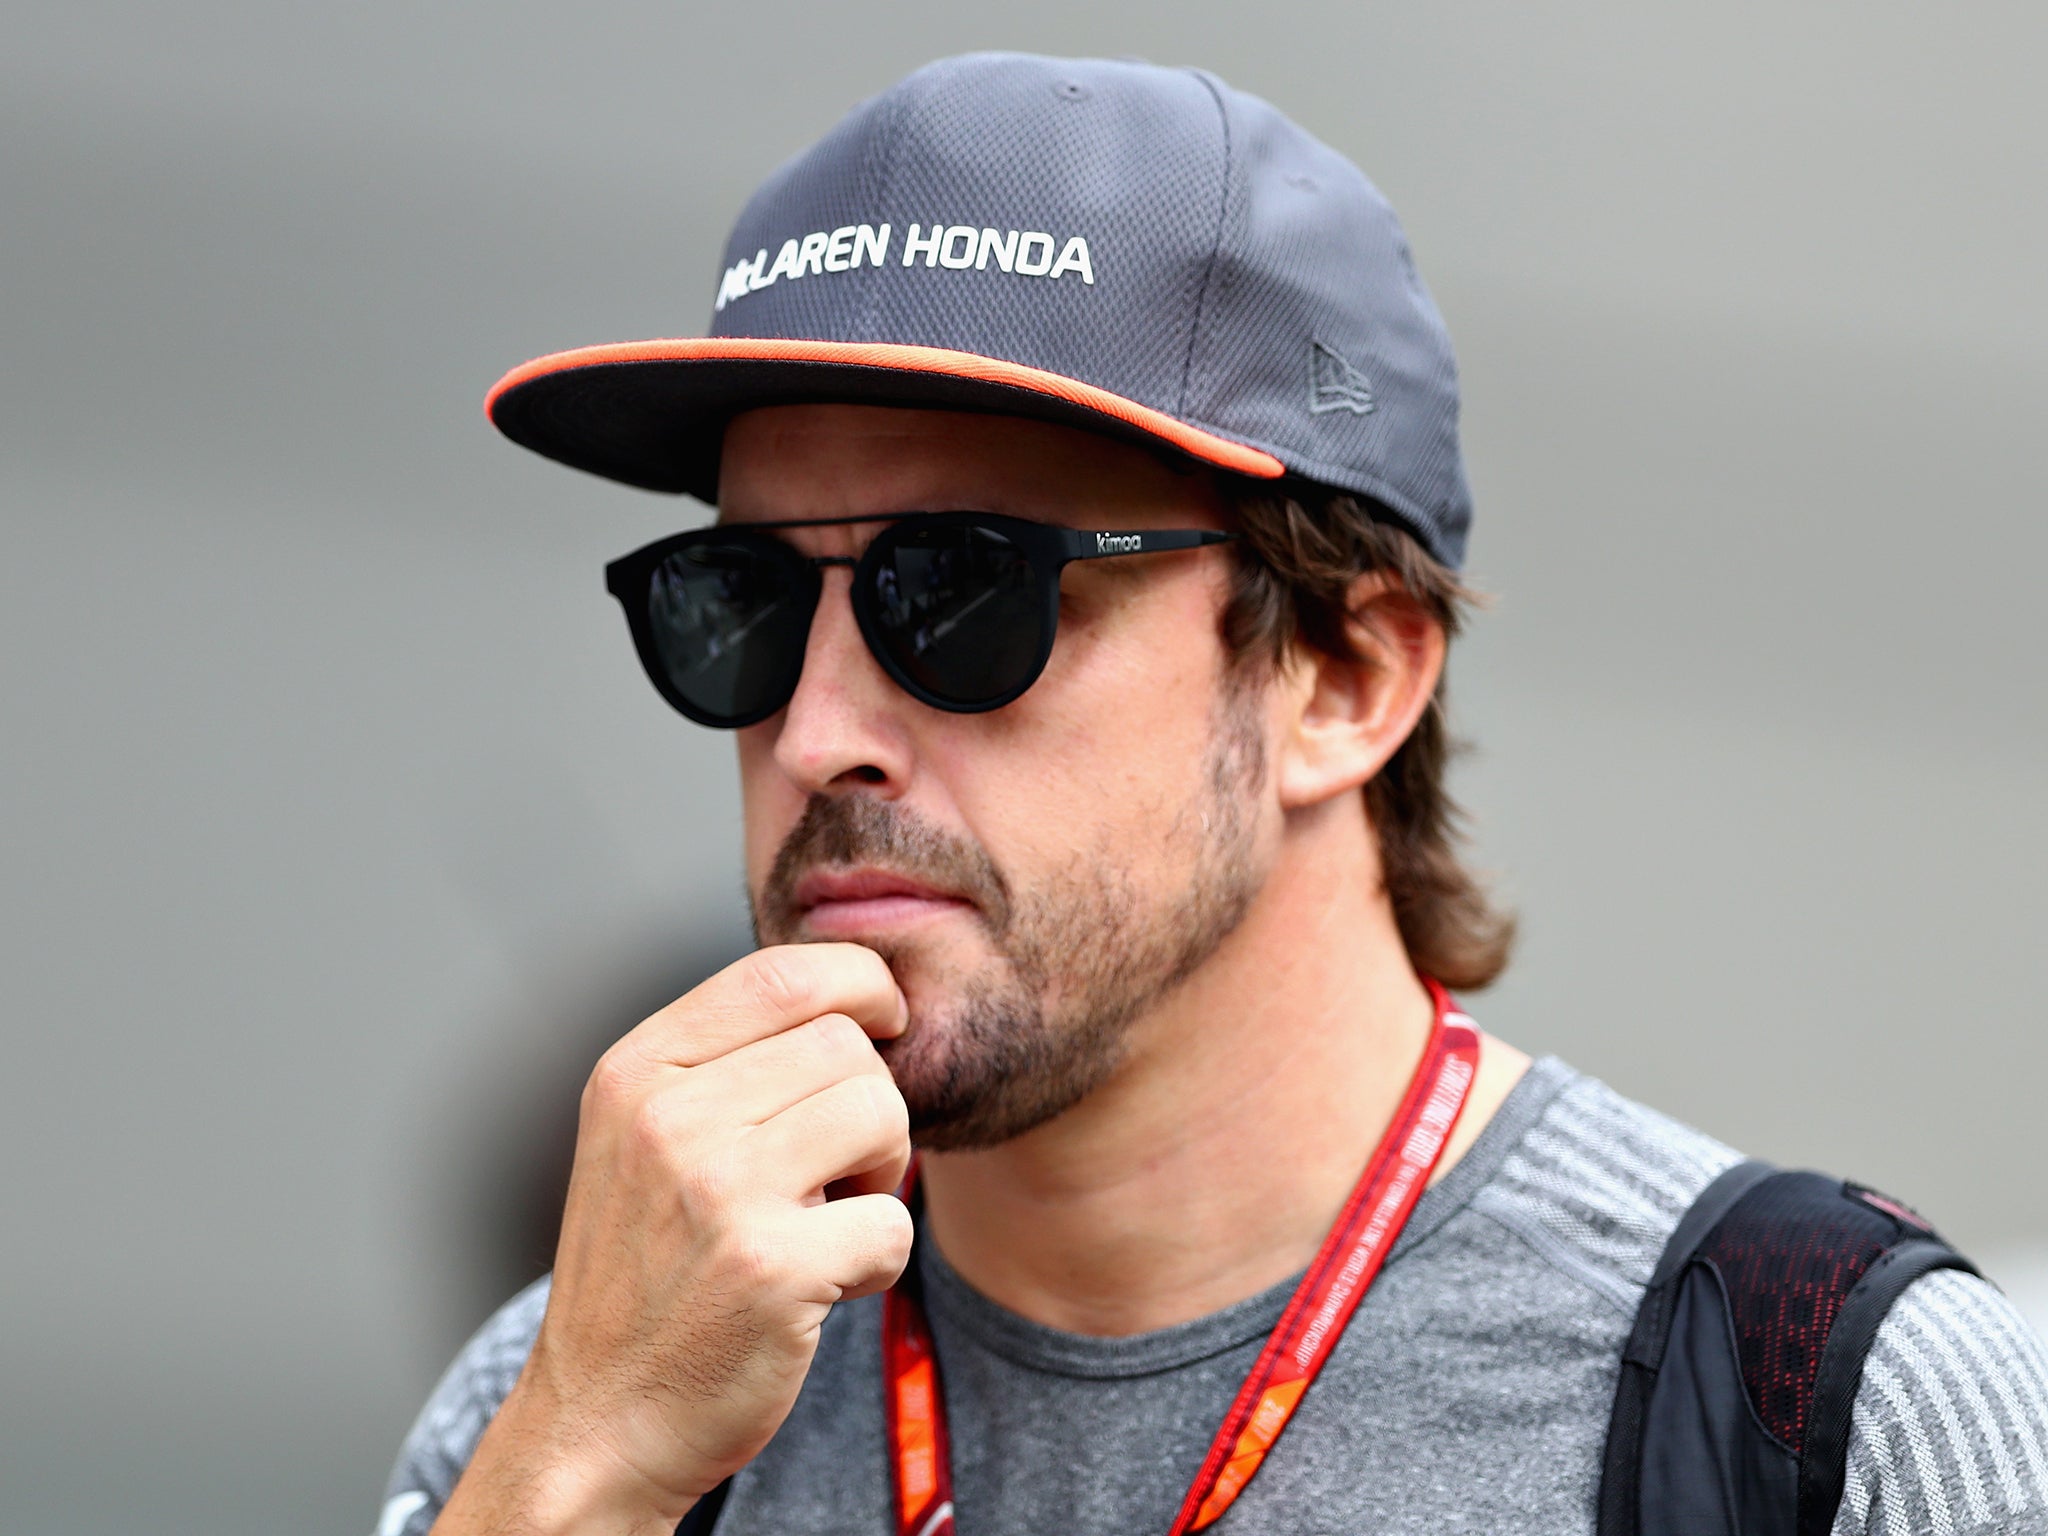 Fernando Alonso looks likely to remain with McLaren for the 2018 Formula One season